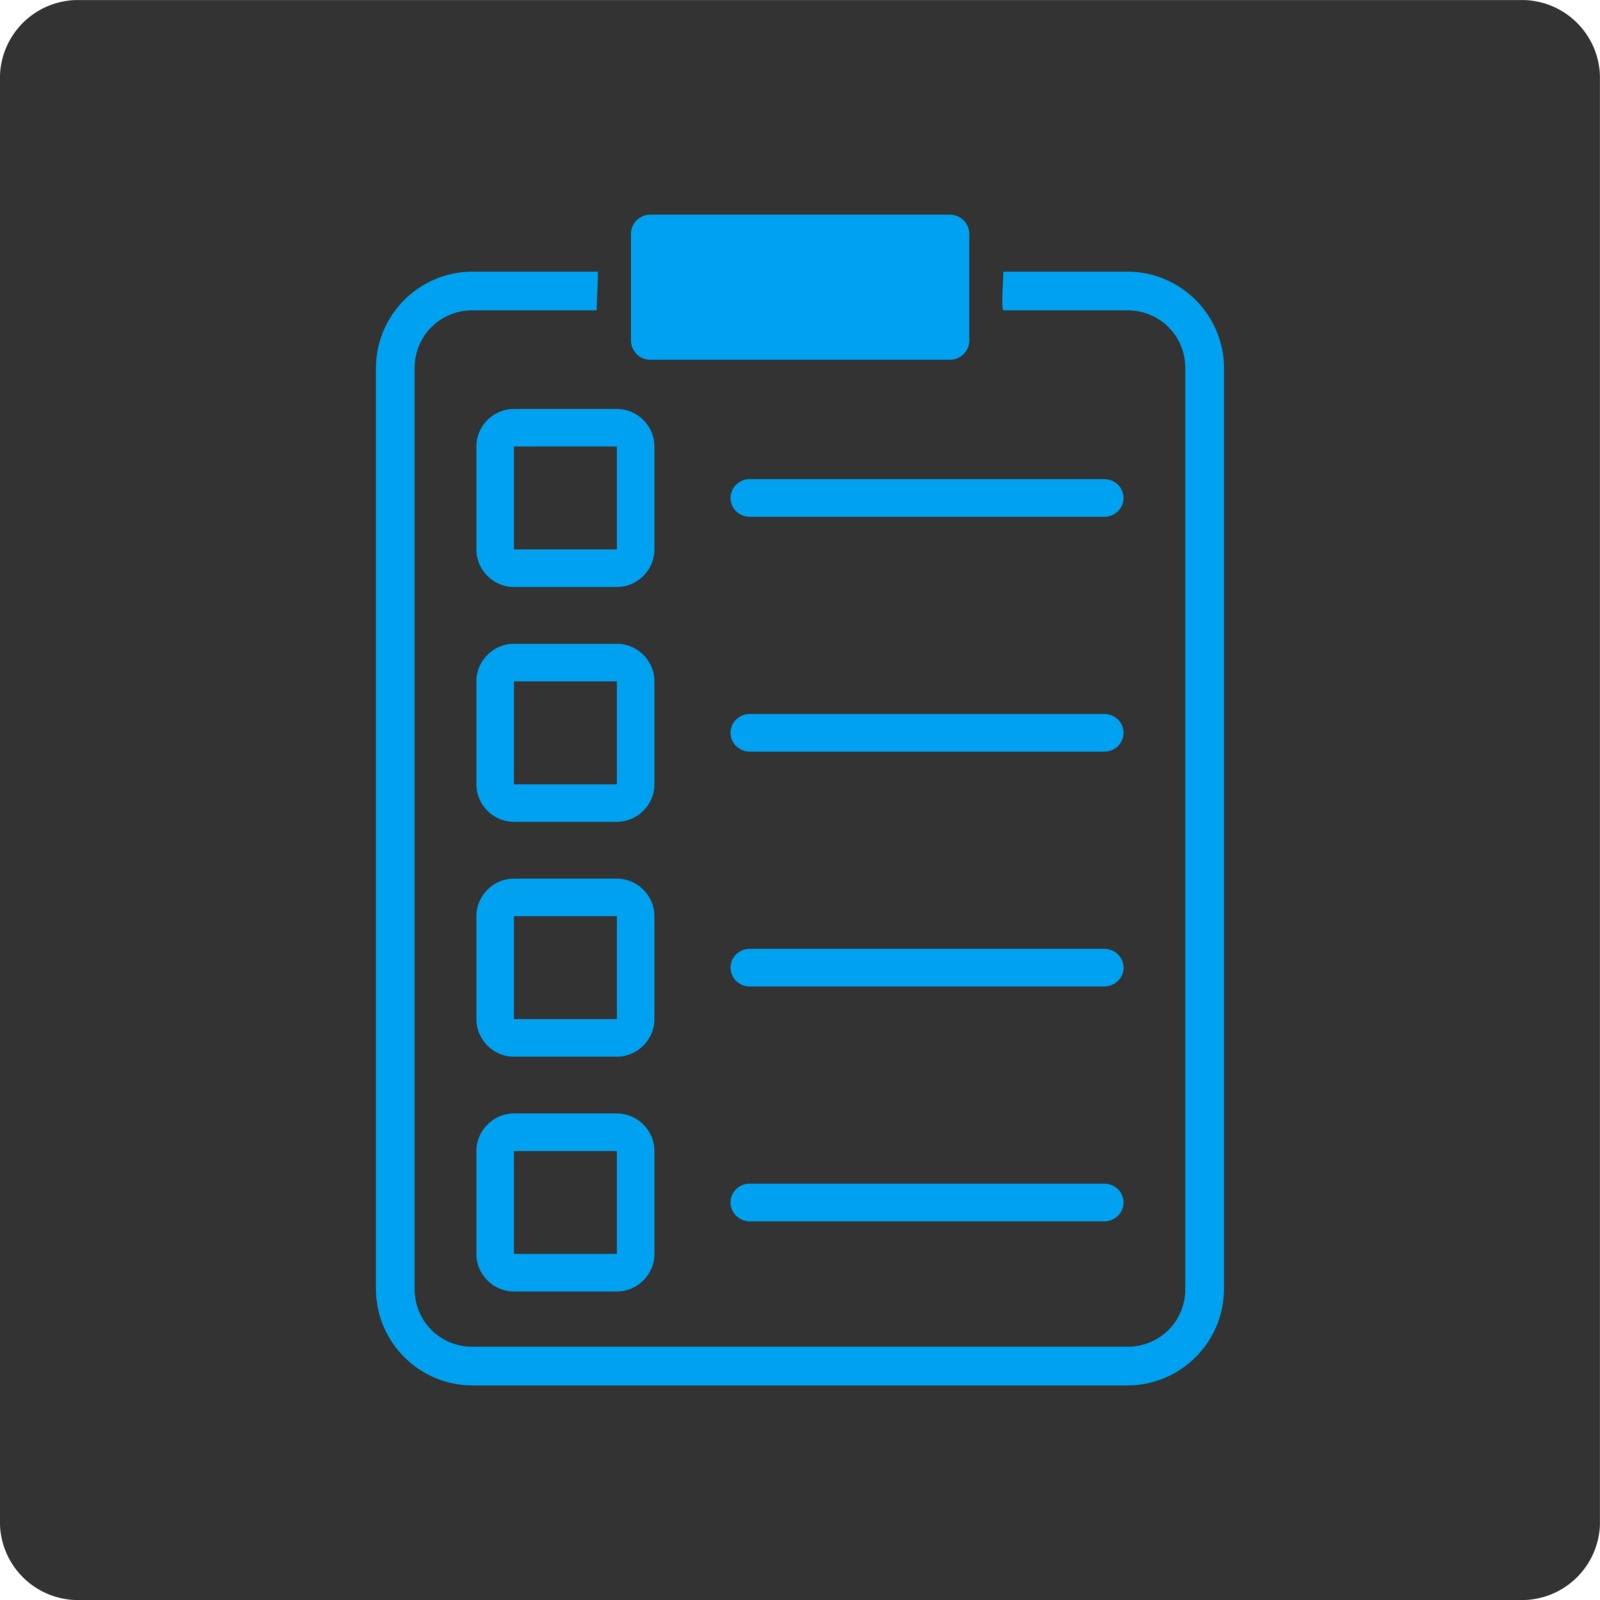 Examination icon. Vector style is blue and gray colors, flat rounded square button on a white background.